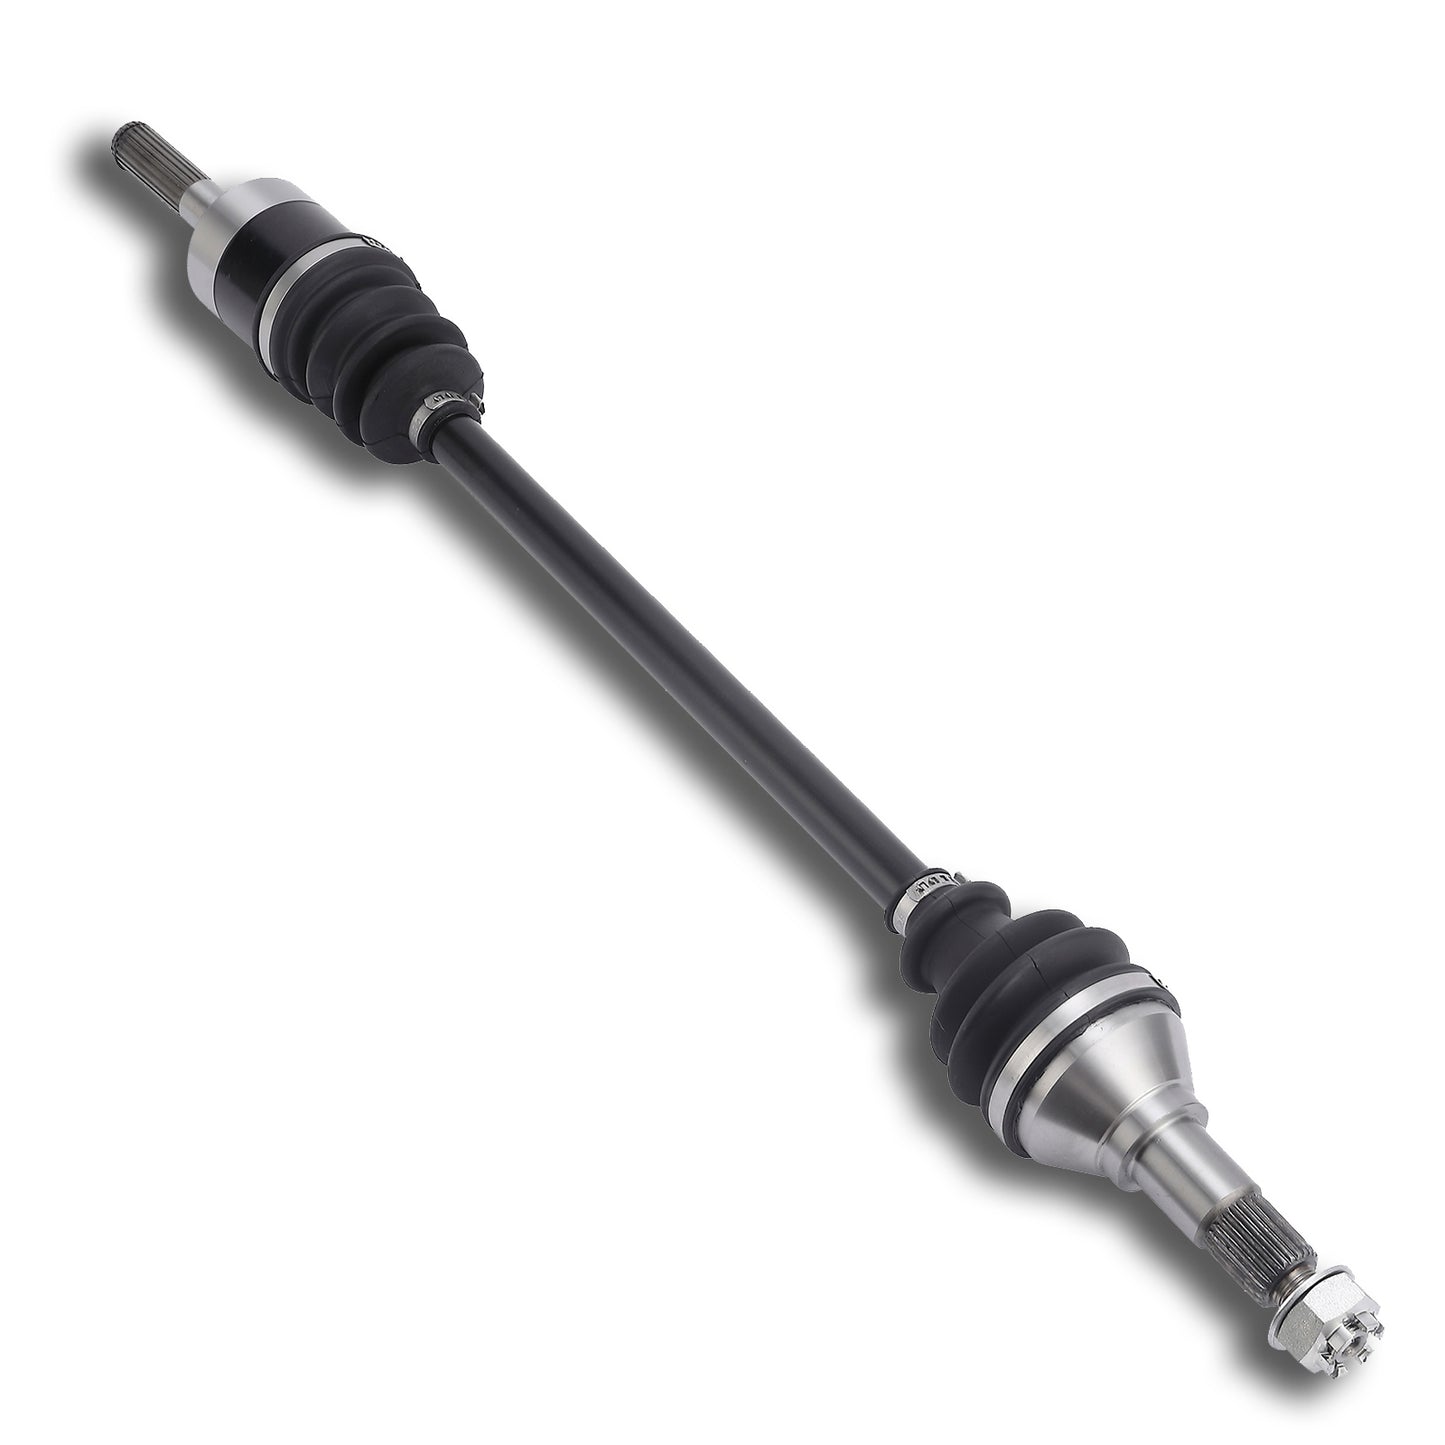 CAM-CA217 Front Right Drive Shaft CV Axle for CAN AM (2014-2018) Maverick 1000 (Exc. X, XC, XMR, XXC) RF 705401236,705401874